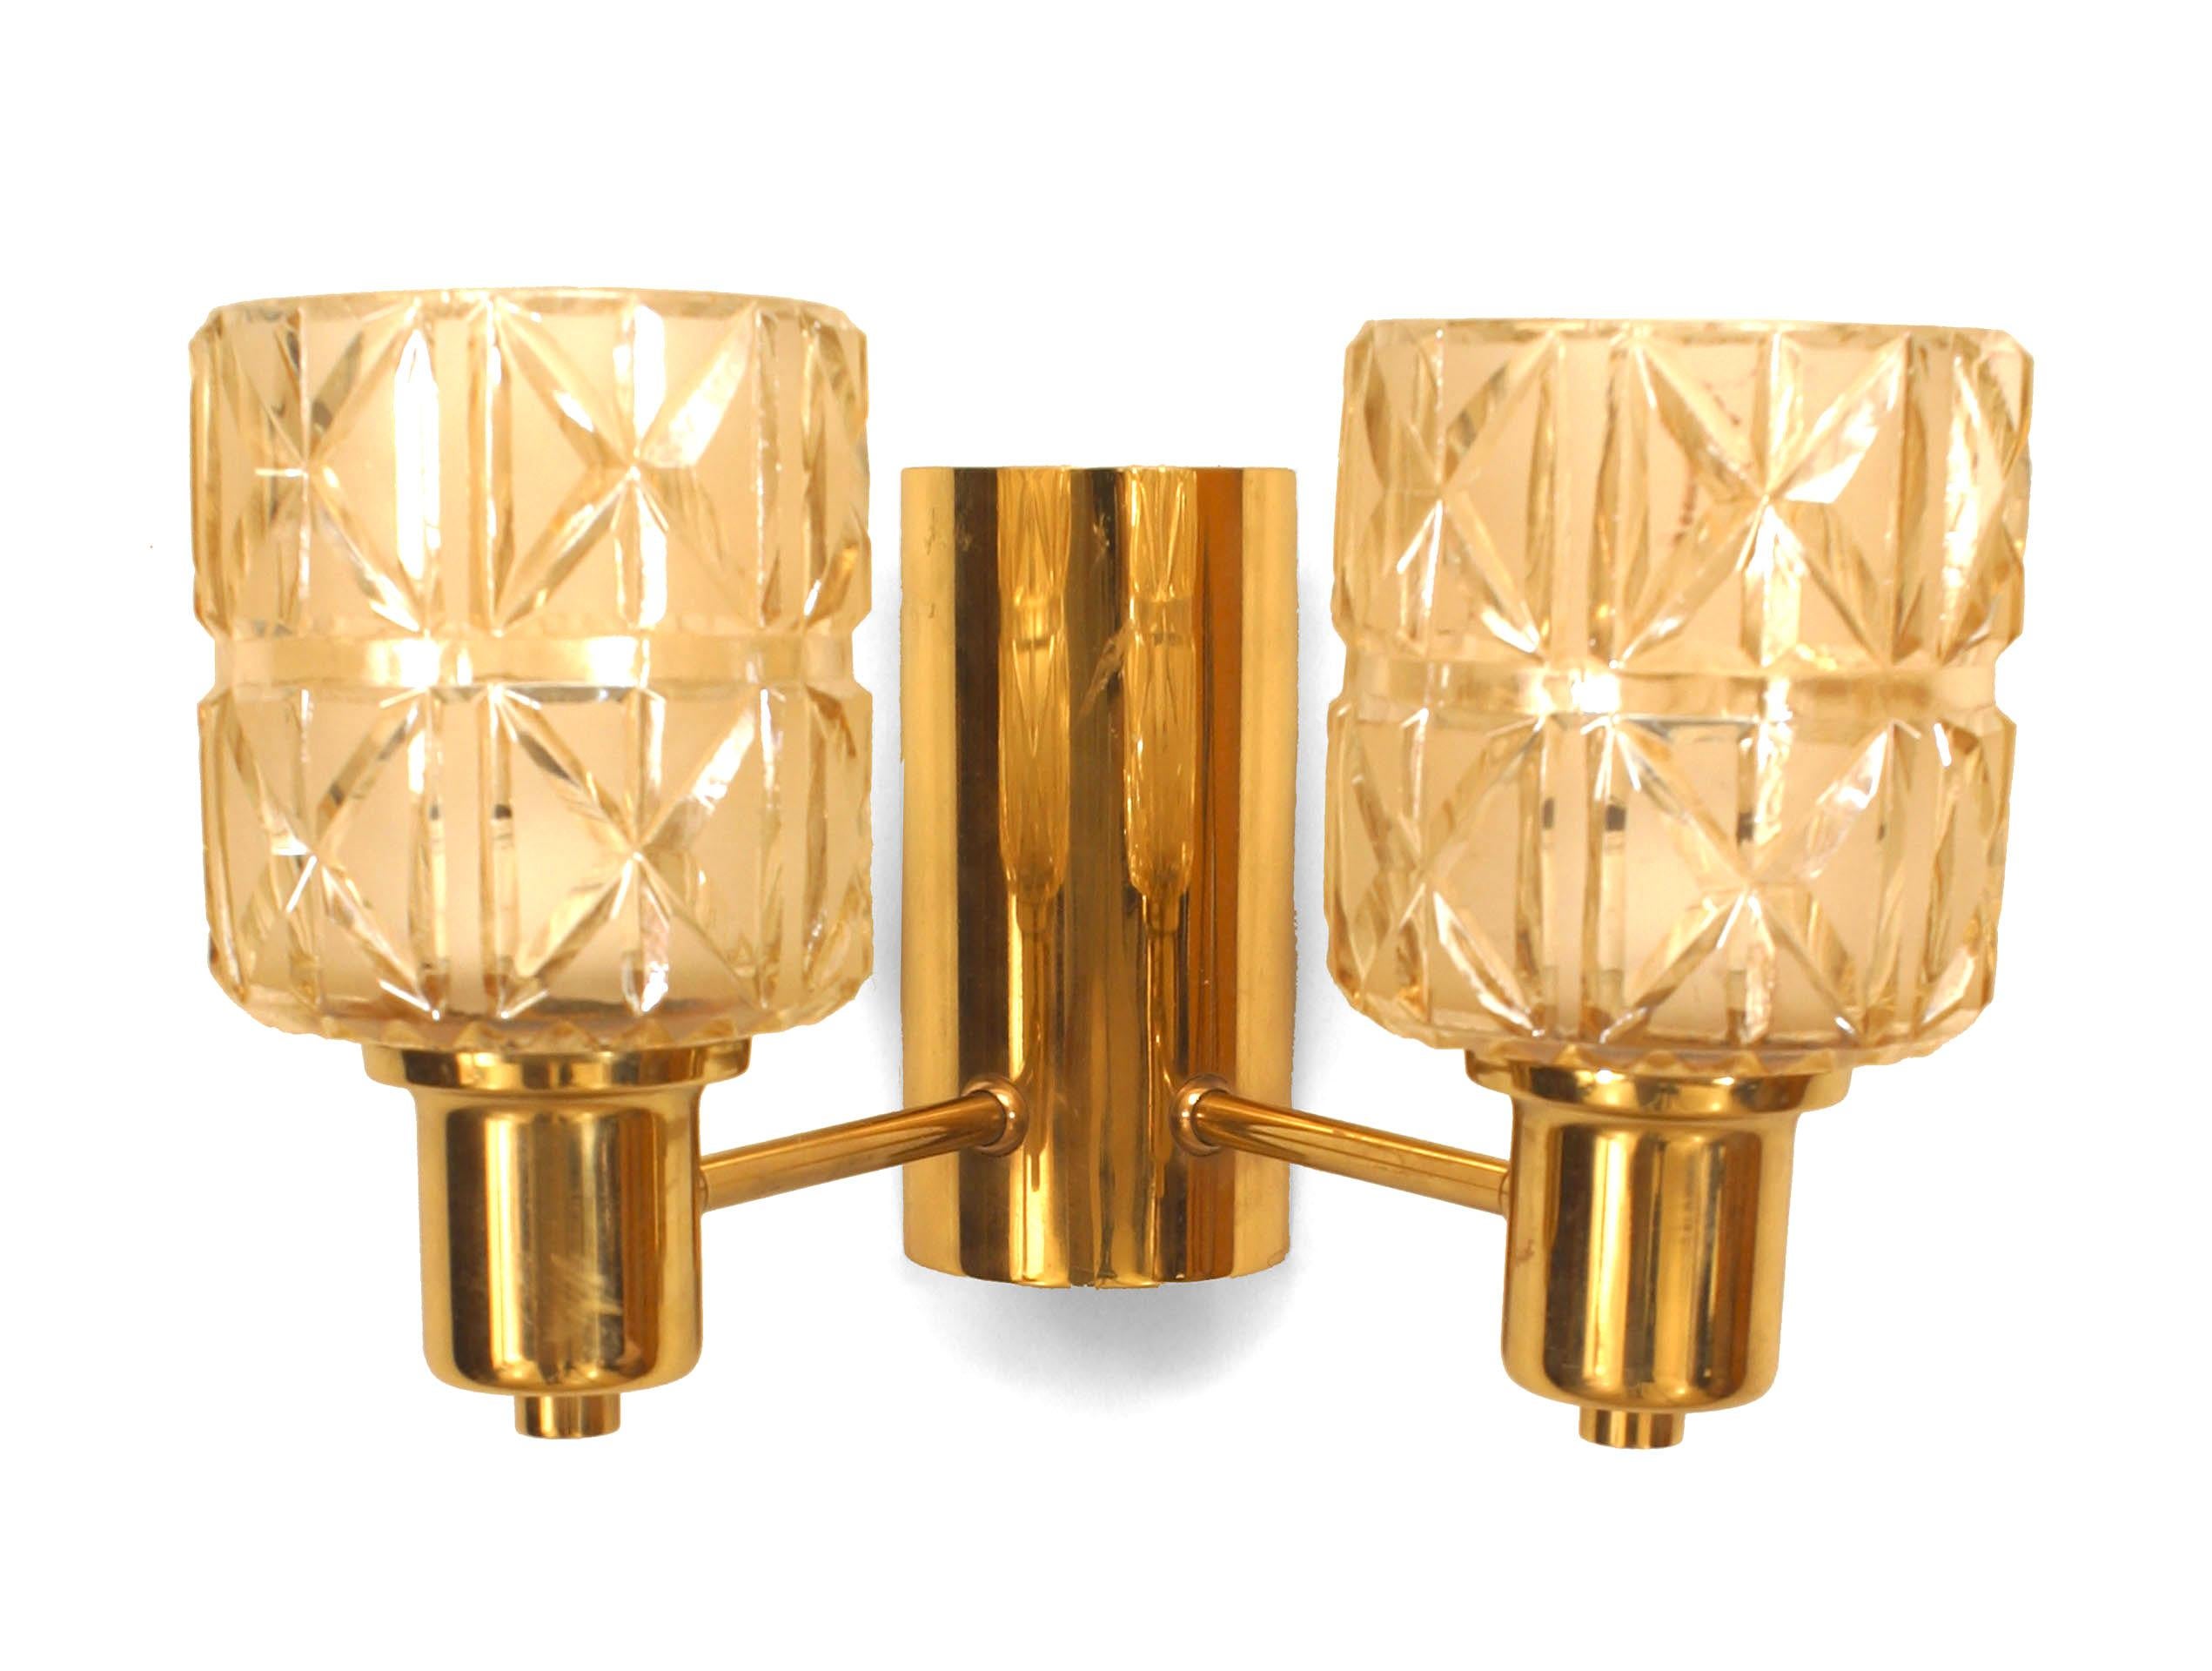 3 Swedish Mid-Century (1950s) brass wall sconces with two arms with two cut glass shades on either side. (attributed to HANS AGNE JAKOBSEN) (PRICED EACH)
